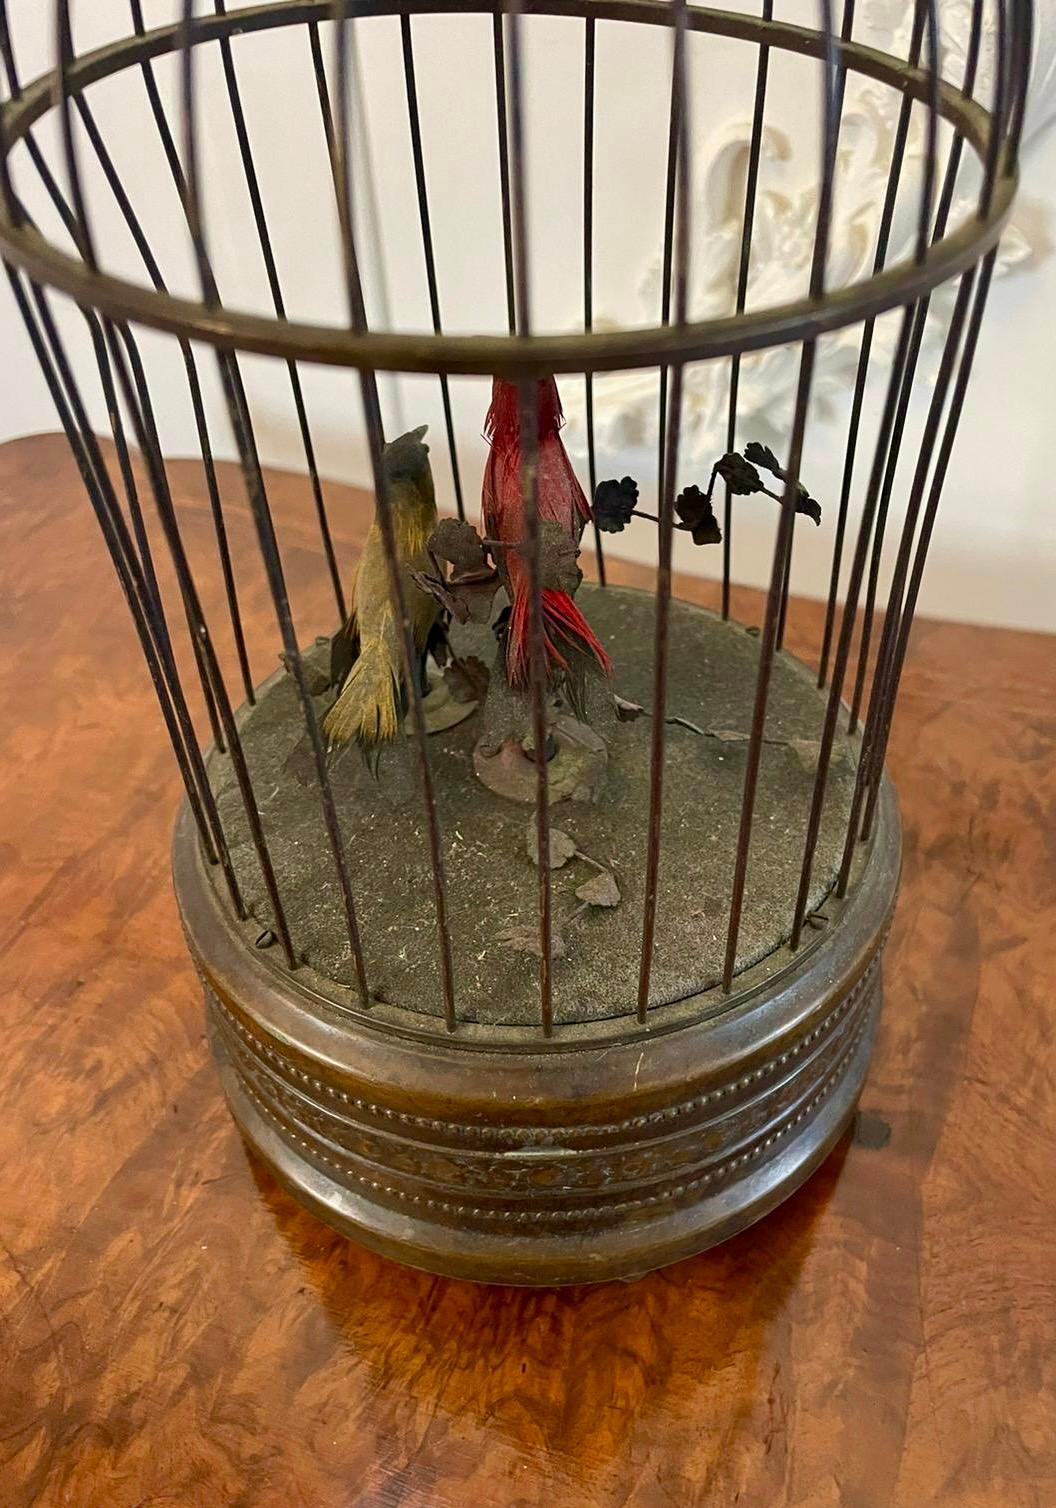 19th century antique brass caged singing birds having two singing and moving birds in a brass cage on a circular ornate brass base


A quaint piece in perfect working order


Dimensions:
Height 25.5 cm 
Width 15 cm 
Depth 15 cm


Dated 1880
